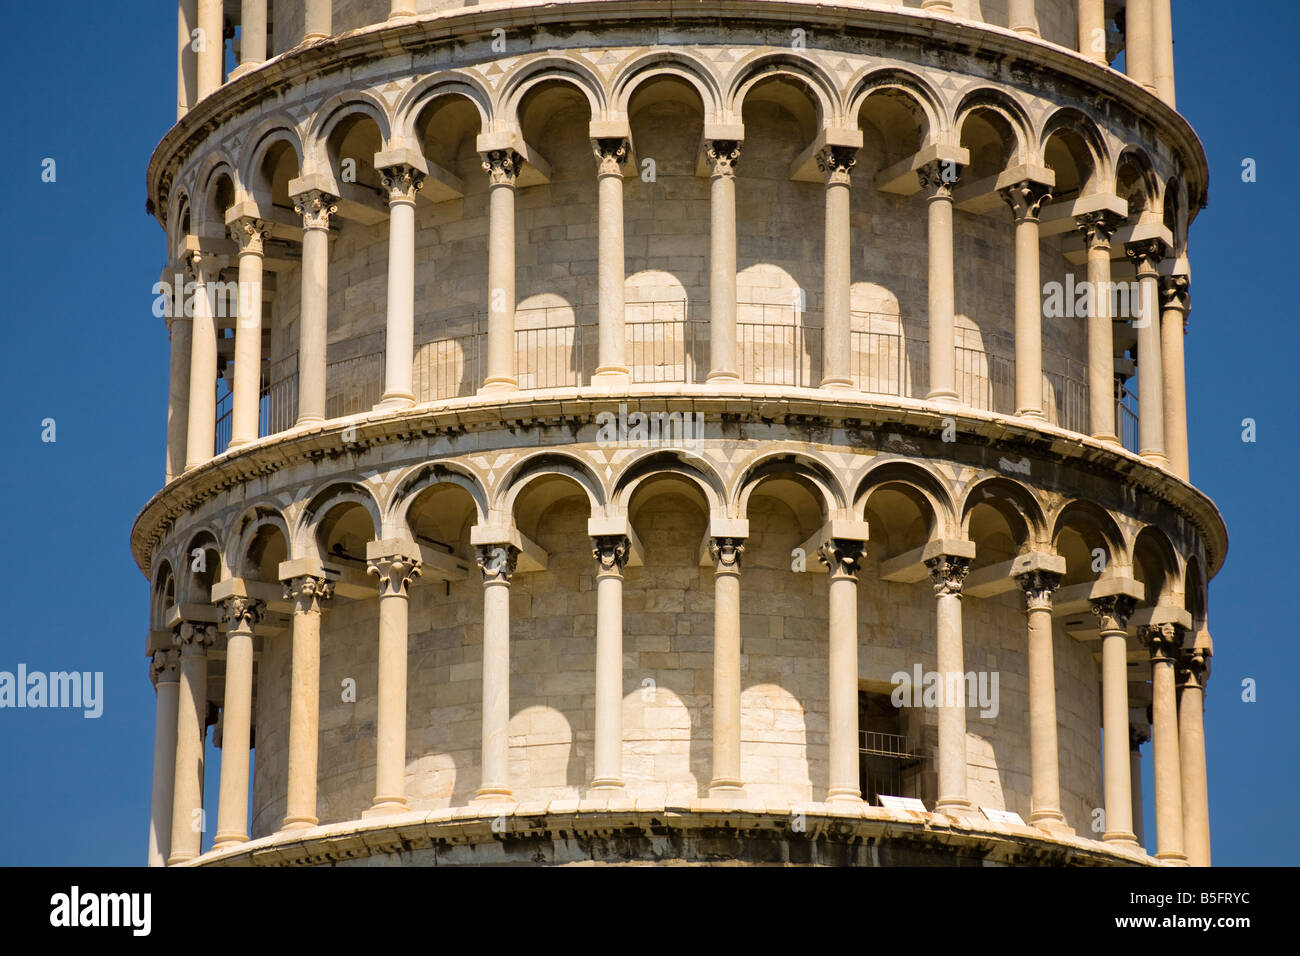 Leaning Tower of Pisa, Piazza del Duomo, Pisa, Tuscany, Italy Stock Photo